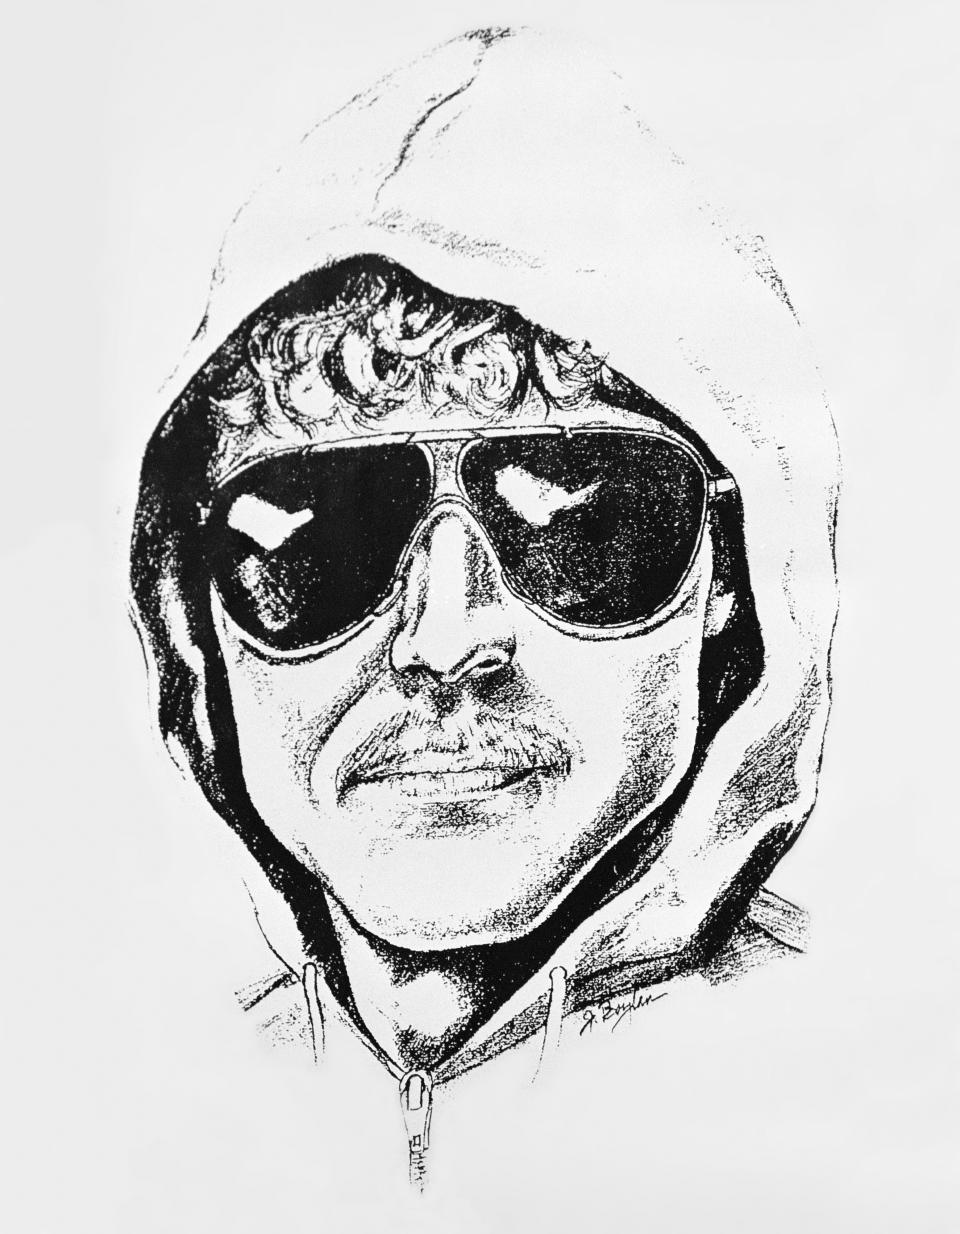 Sketch artist Jeanne Boylan’s drawing of the Unabomber suspect - Credit: ASSOCIATED PRESS